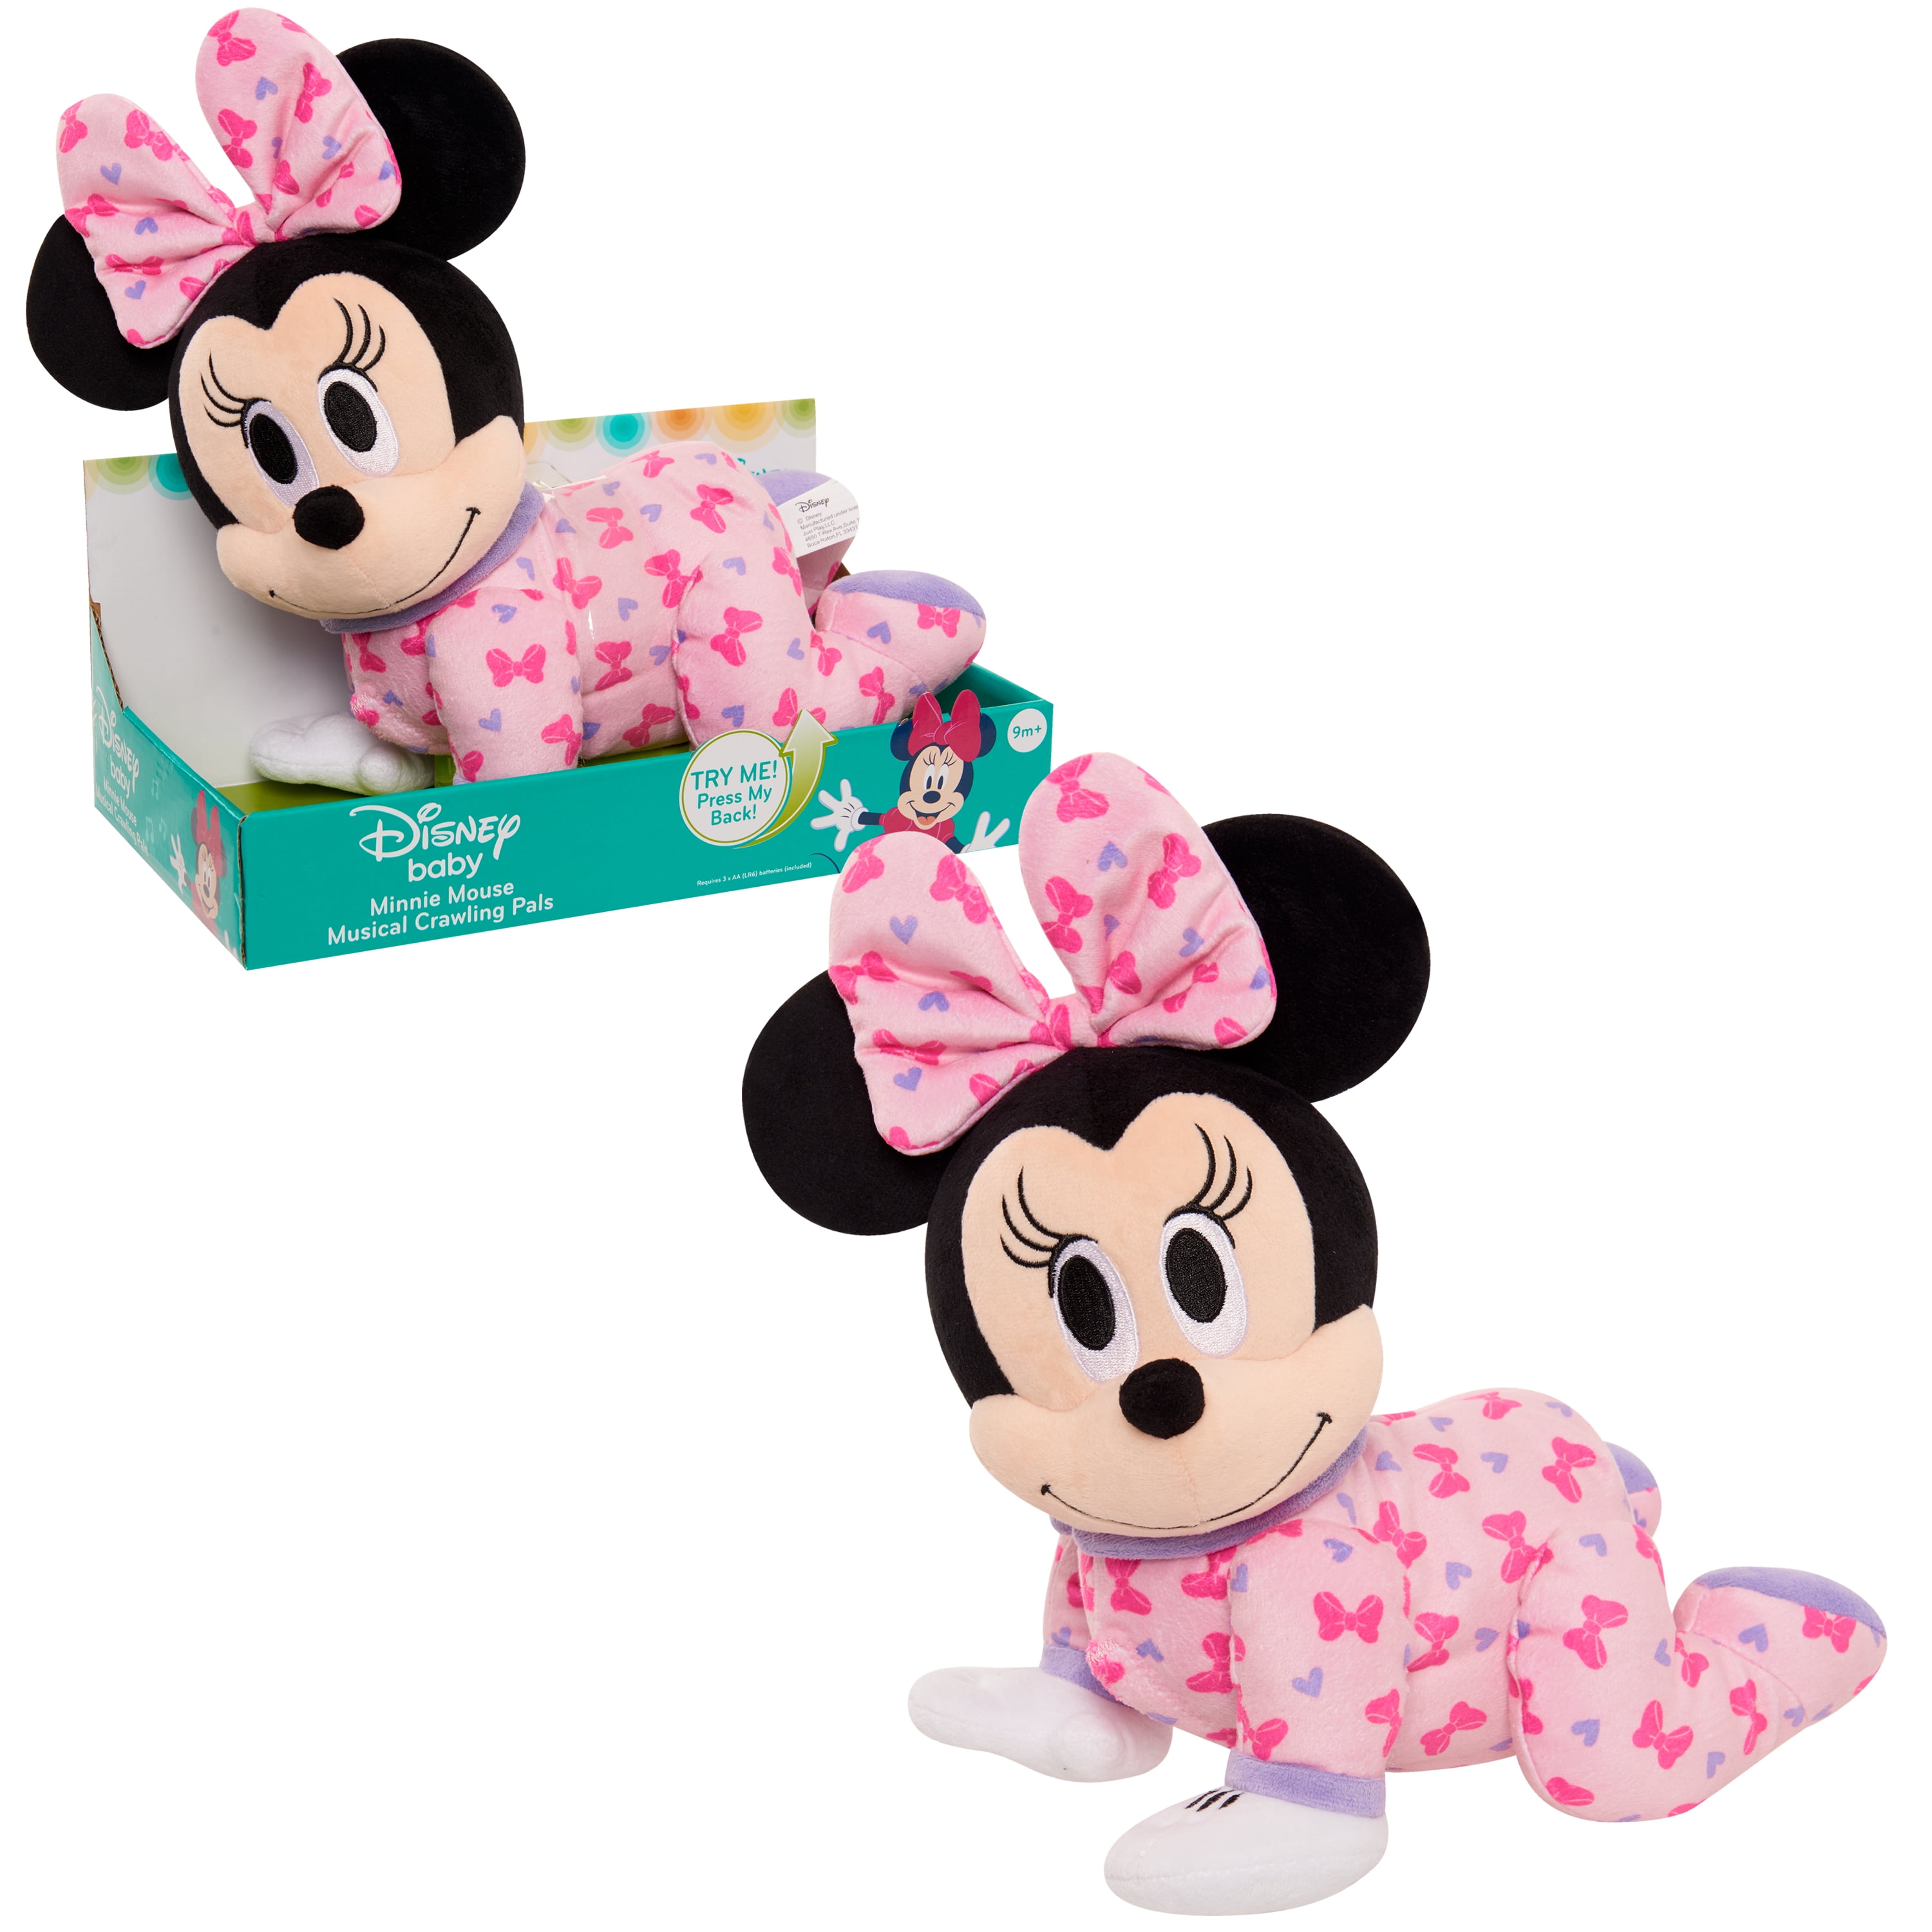 Disney Baby Musical Crawling Pals Plush, Minnie, Ages 09+